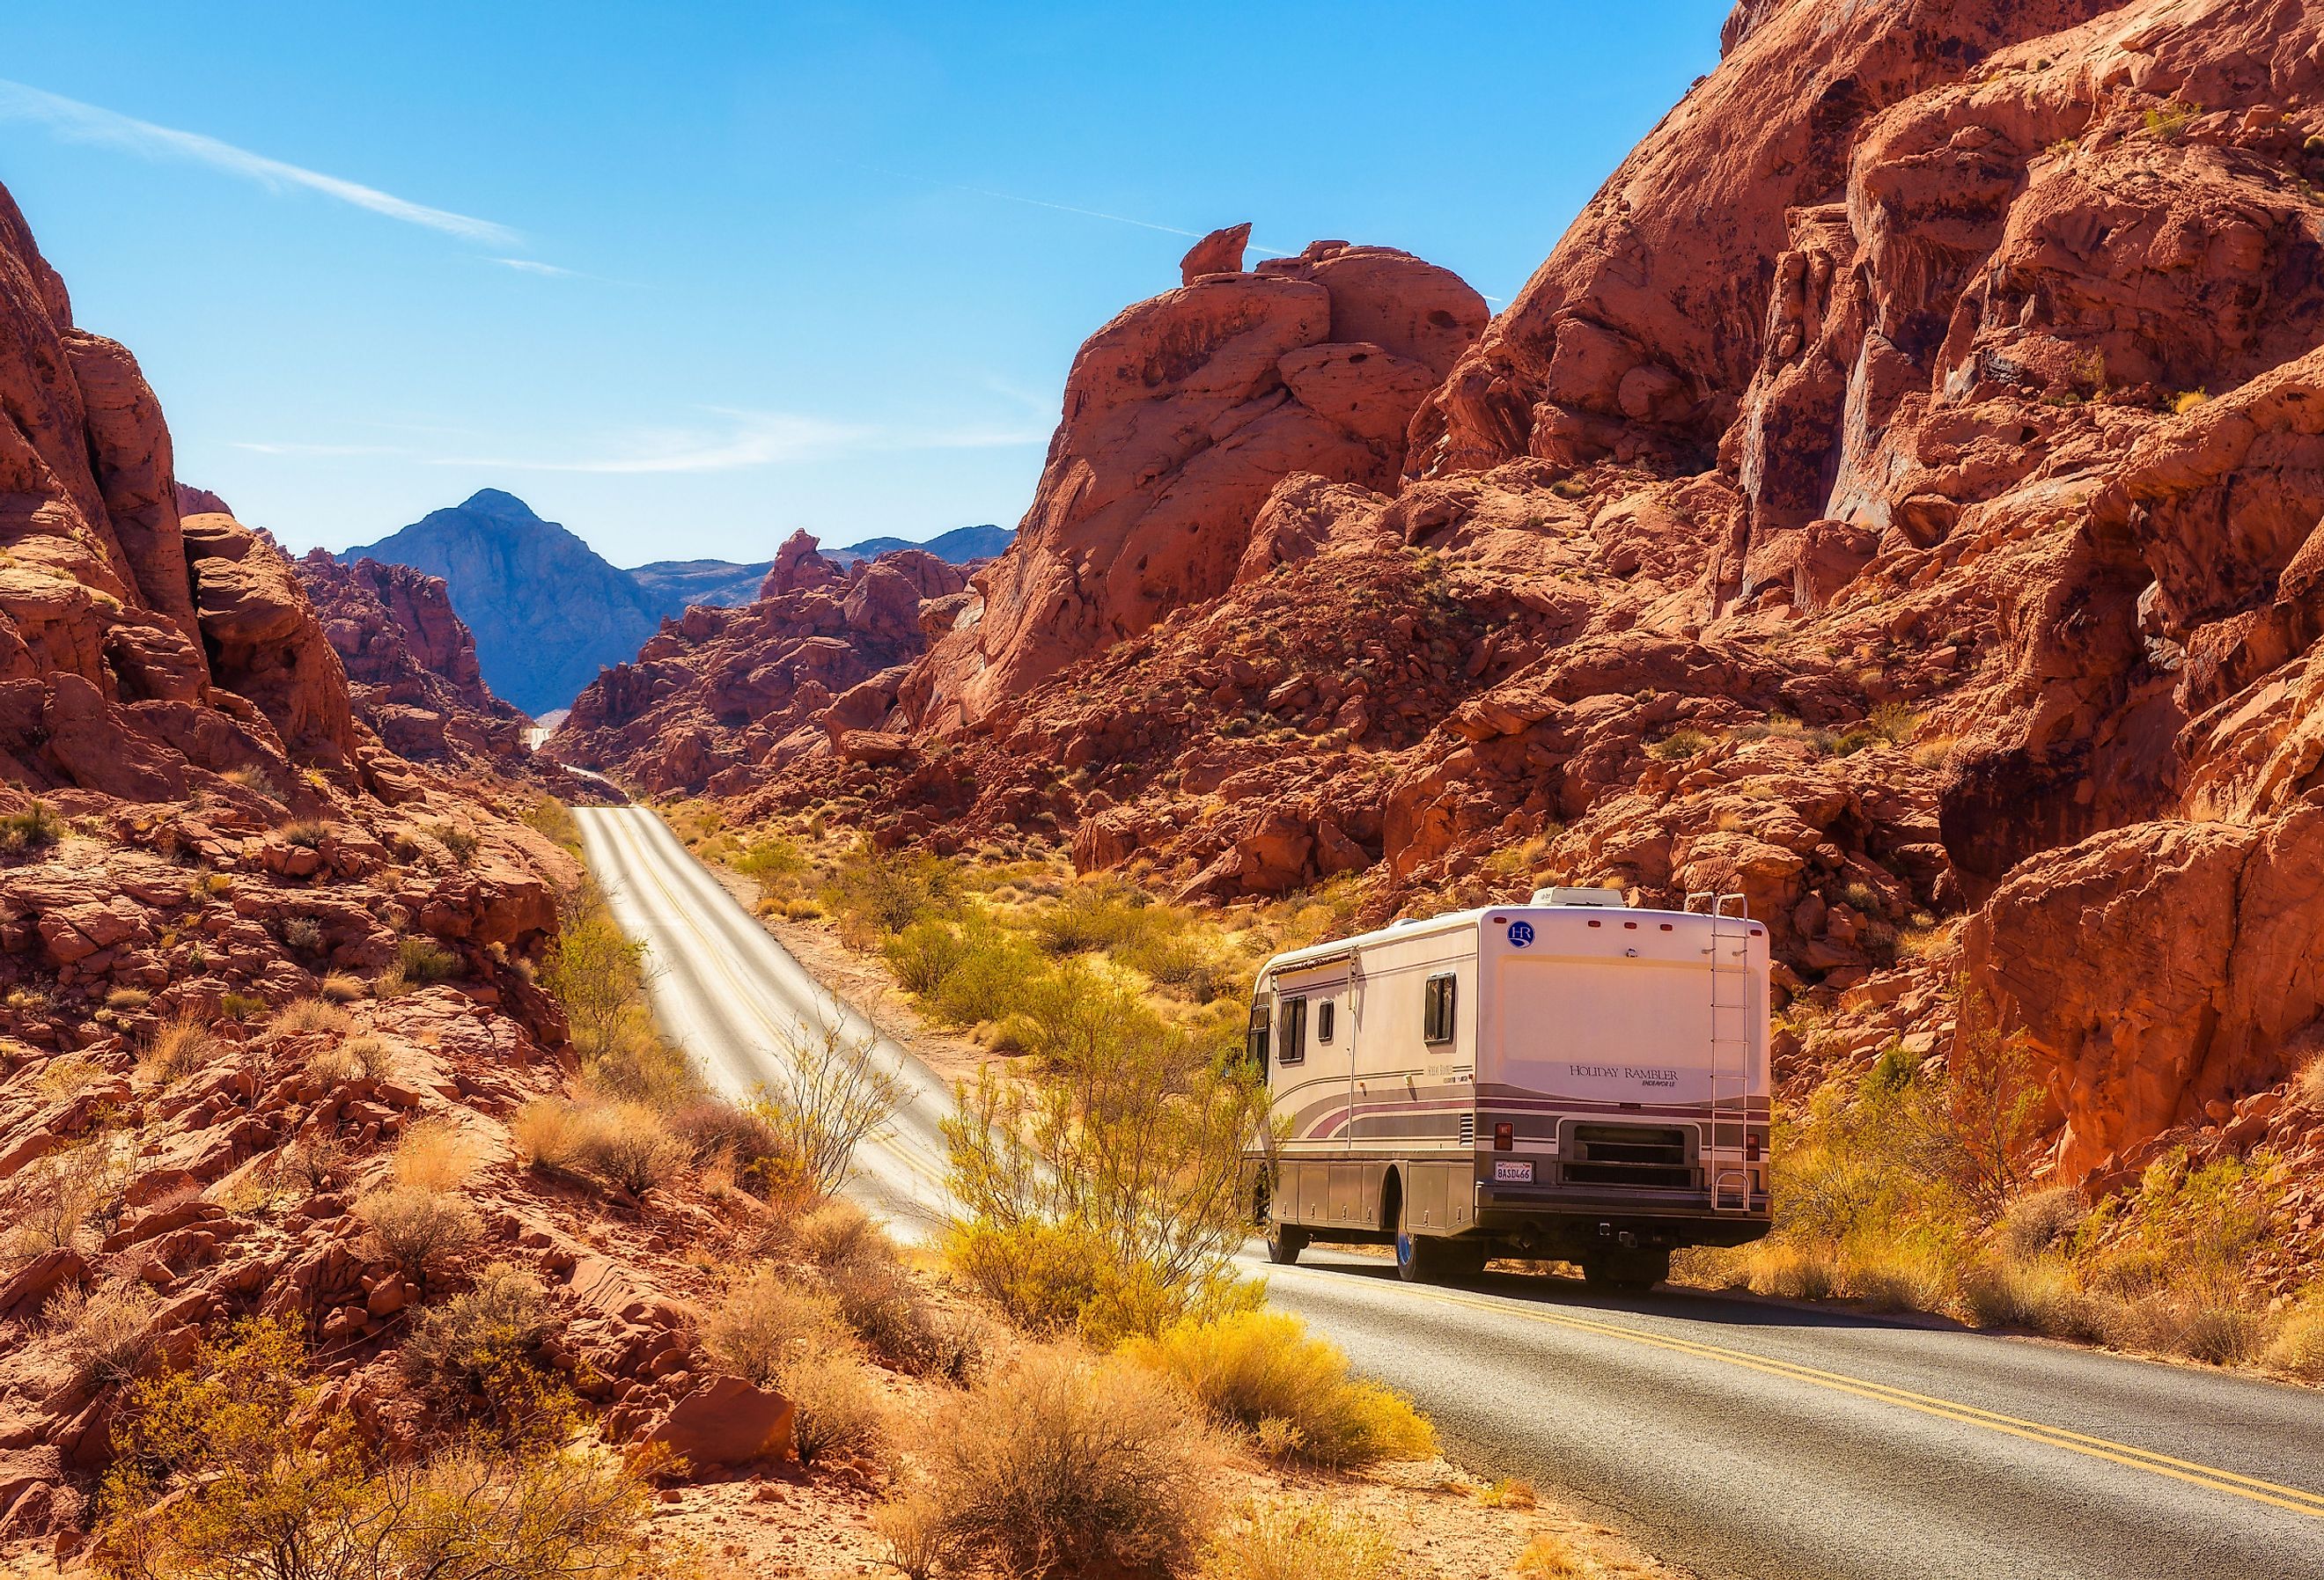 Motorhome trailer traveling on the road in Valley of Fire in Nevada. Image credit Nick Fox via Shutterstock.